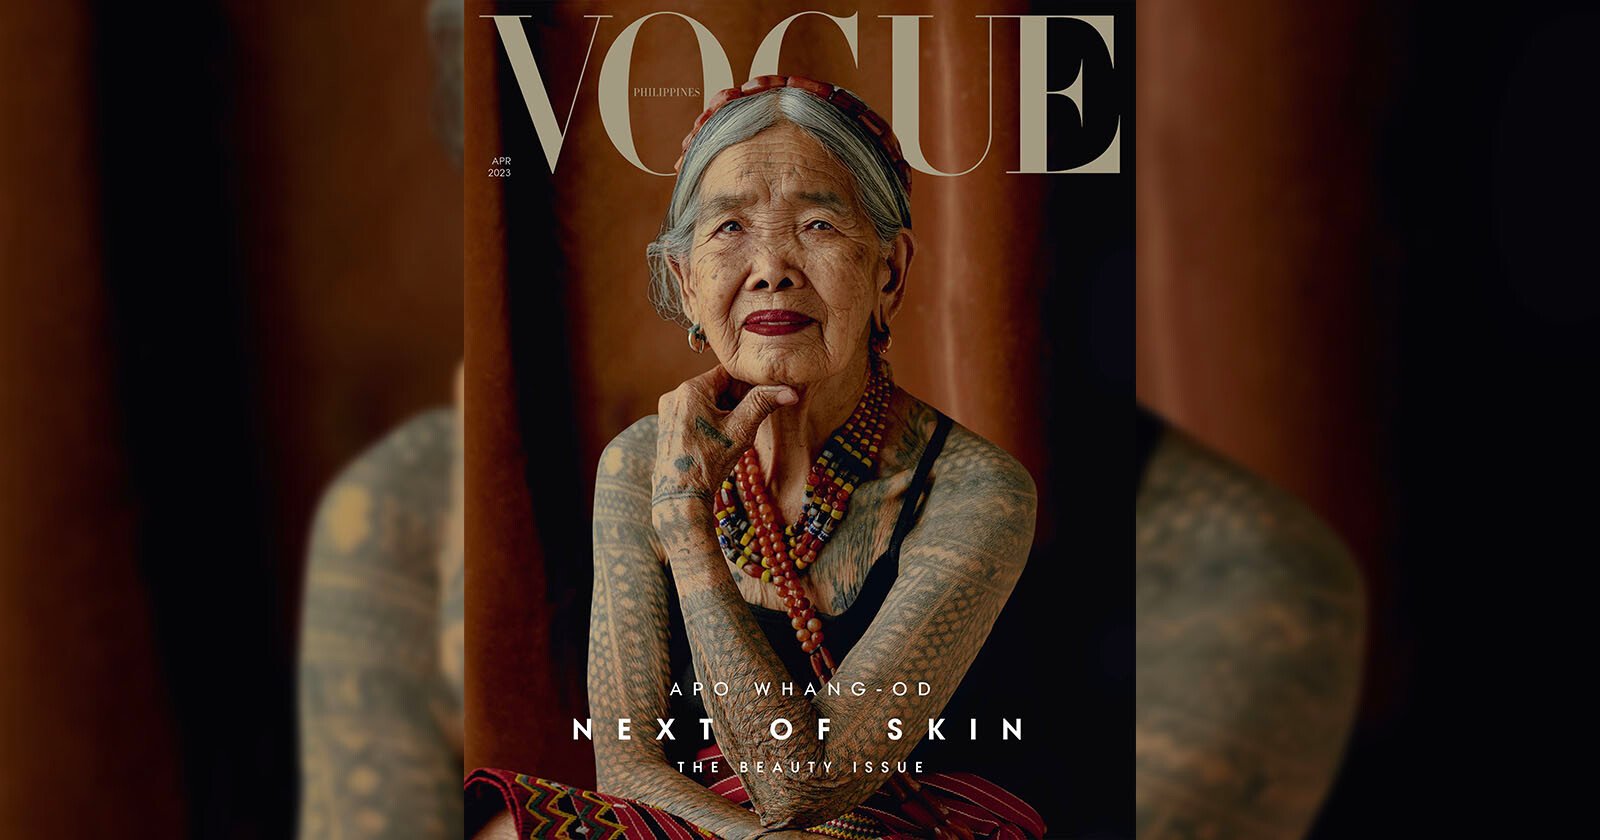 Tattooed 106-Year-Old Becomes Vogue’s Oldest Ever Cover Model